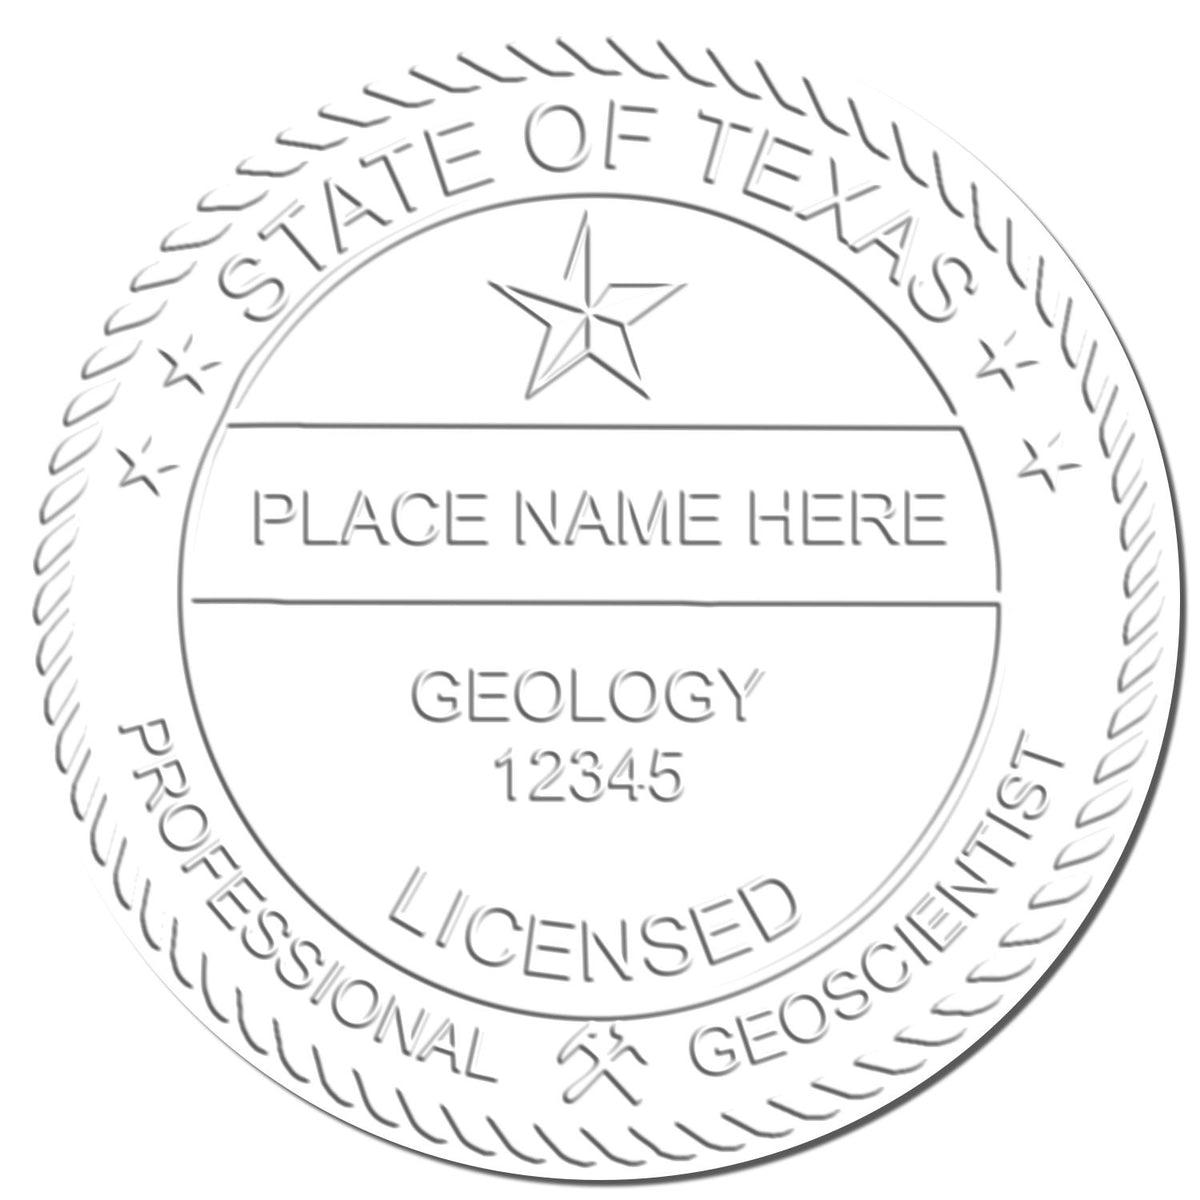 A photograph of the State of Texas Extended Long Reach Geologist Seal stamp impression reveals a vivid, professional image of the on paper.